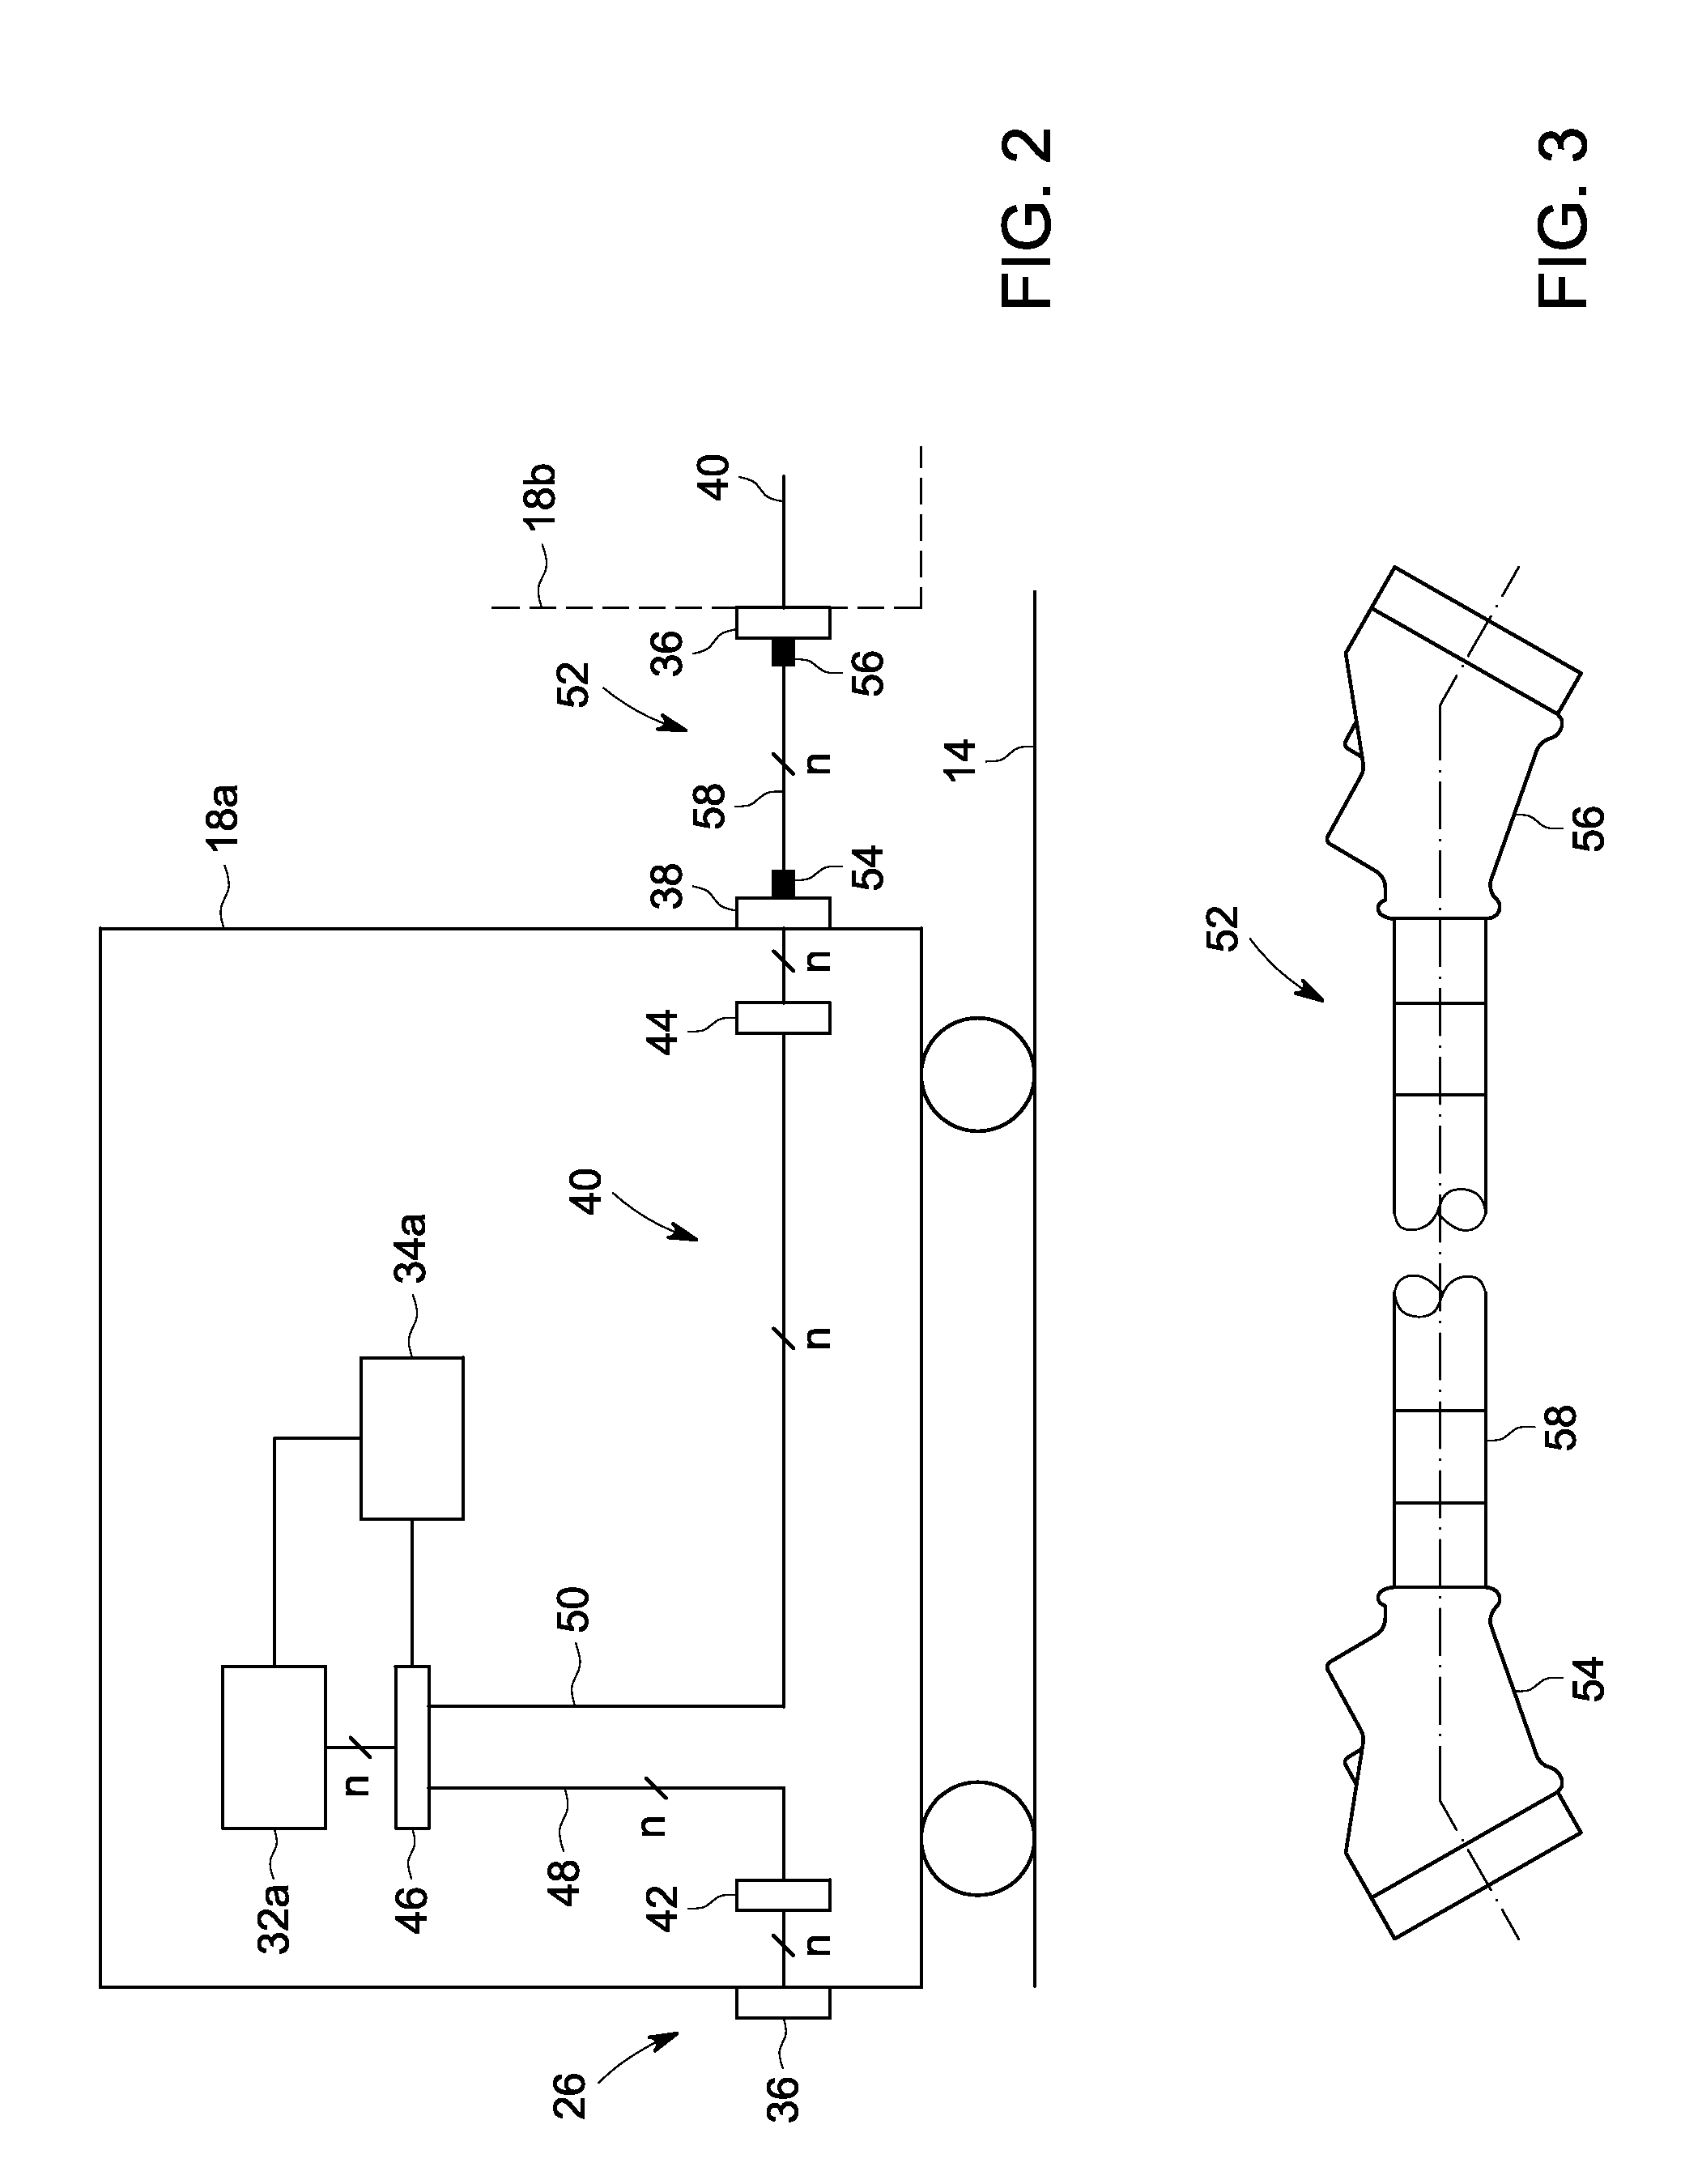 System and method for communicating data in a train having one or more locomotive consists